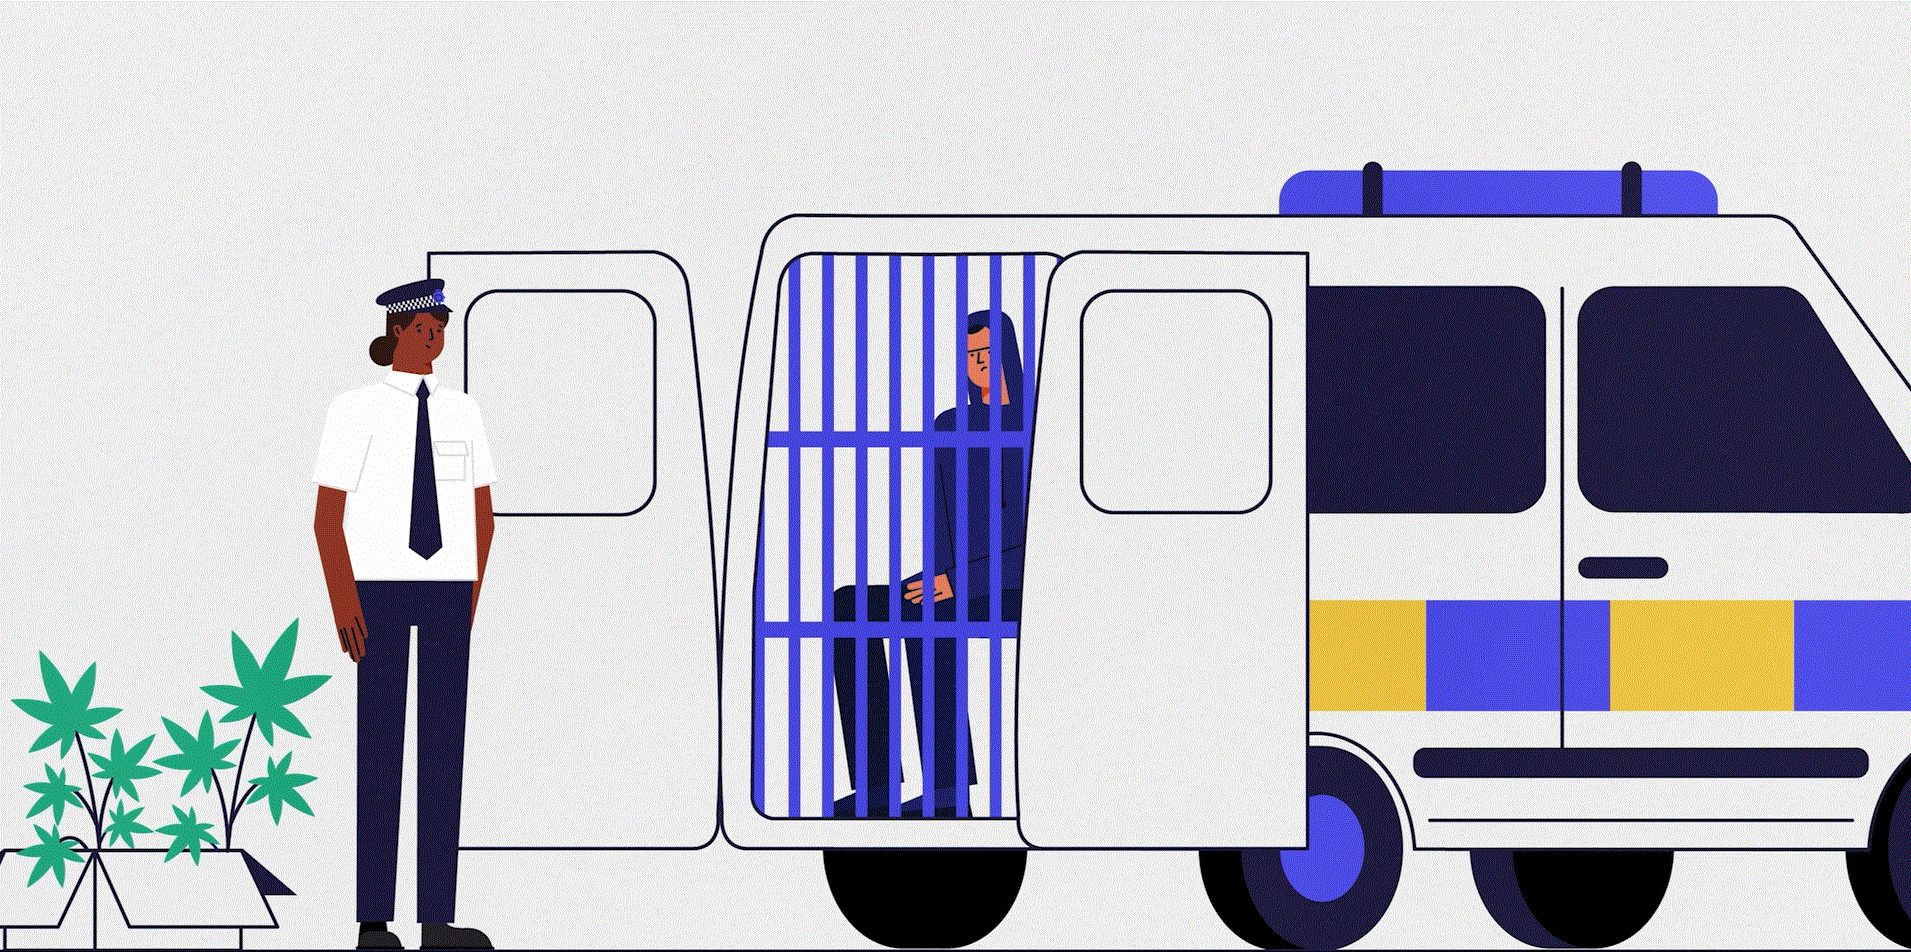 Animation showing a person in the back of a police van with a police officer standing guard.